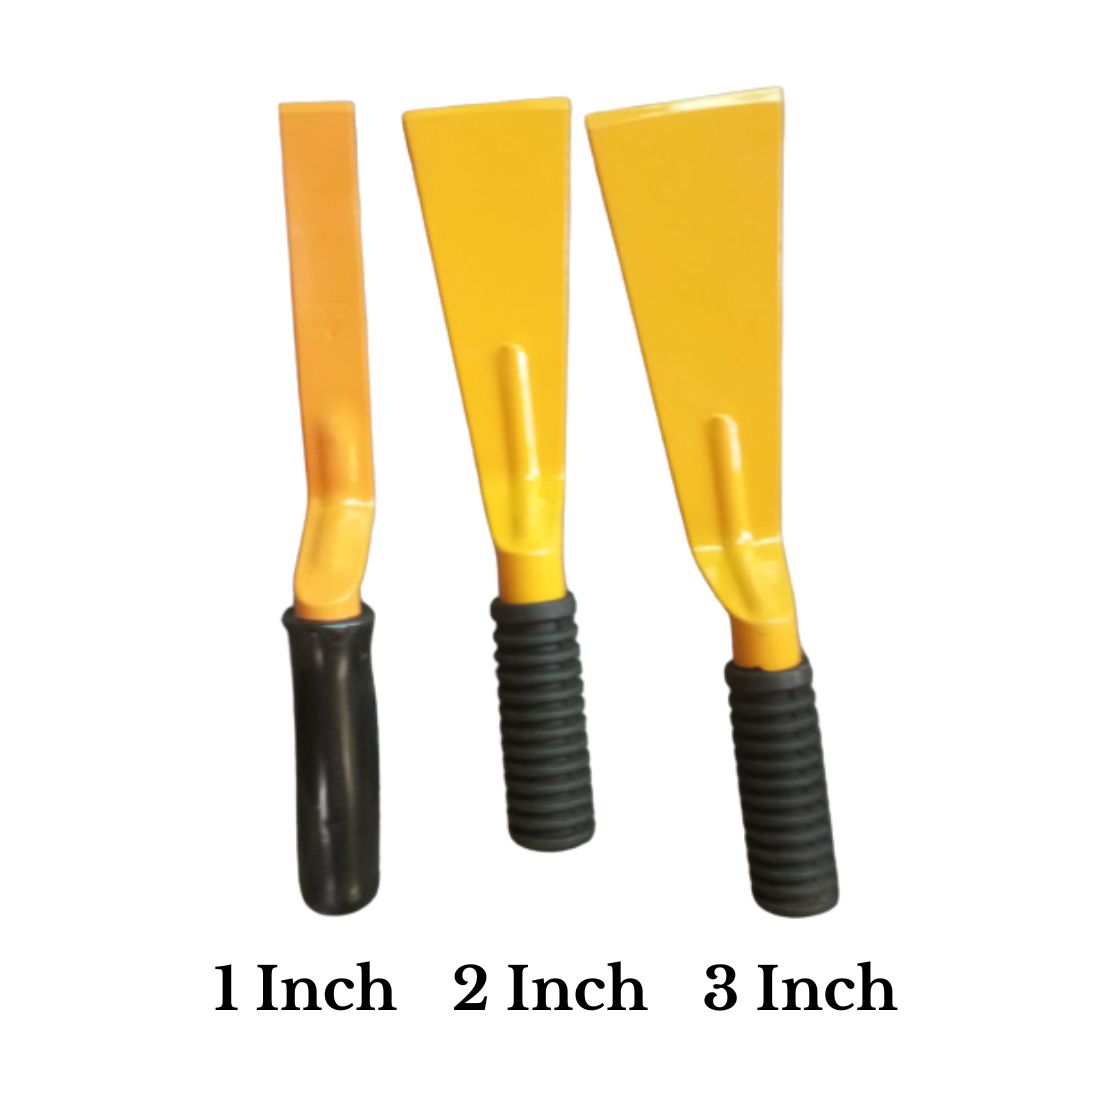 Falcon SPS-1000 Khurpa/Khurpi with PVC Grip Handle